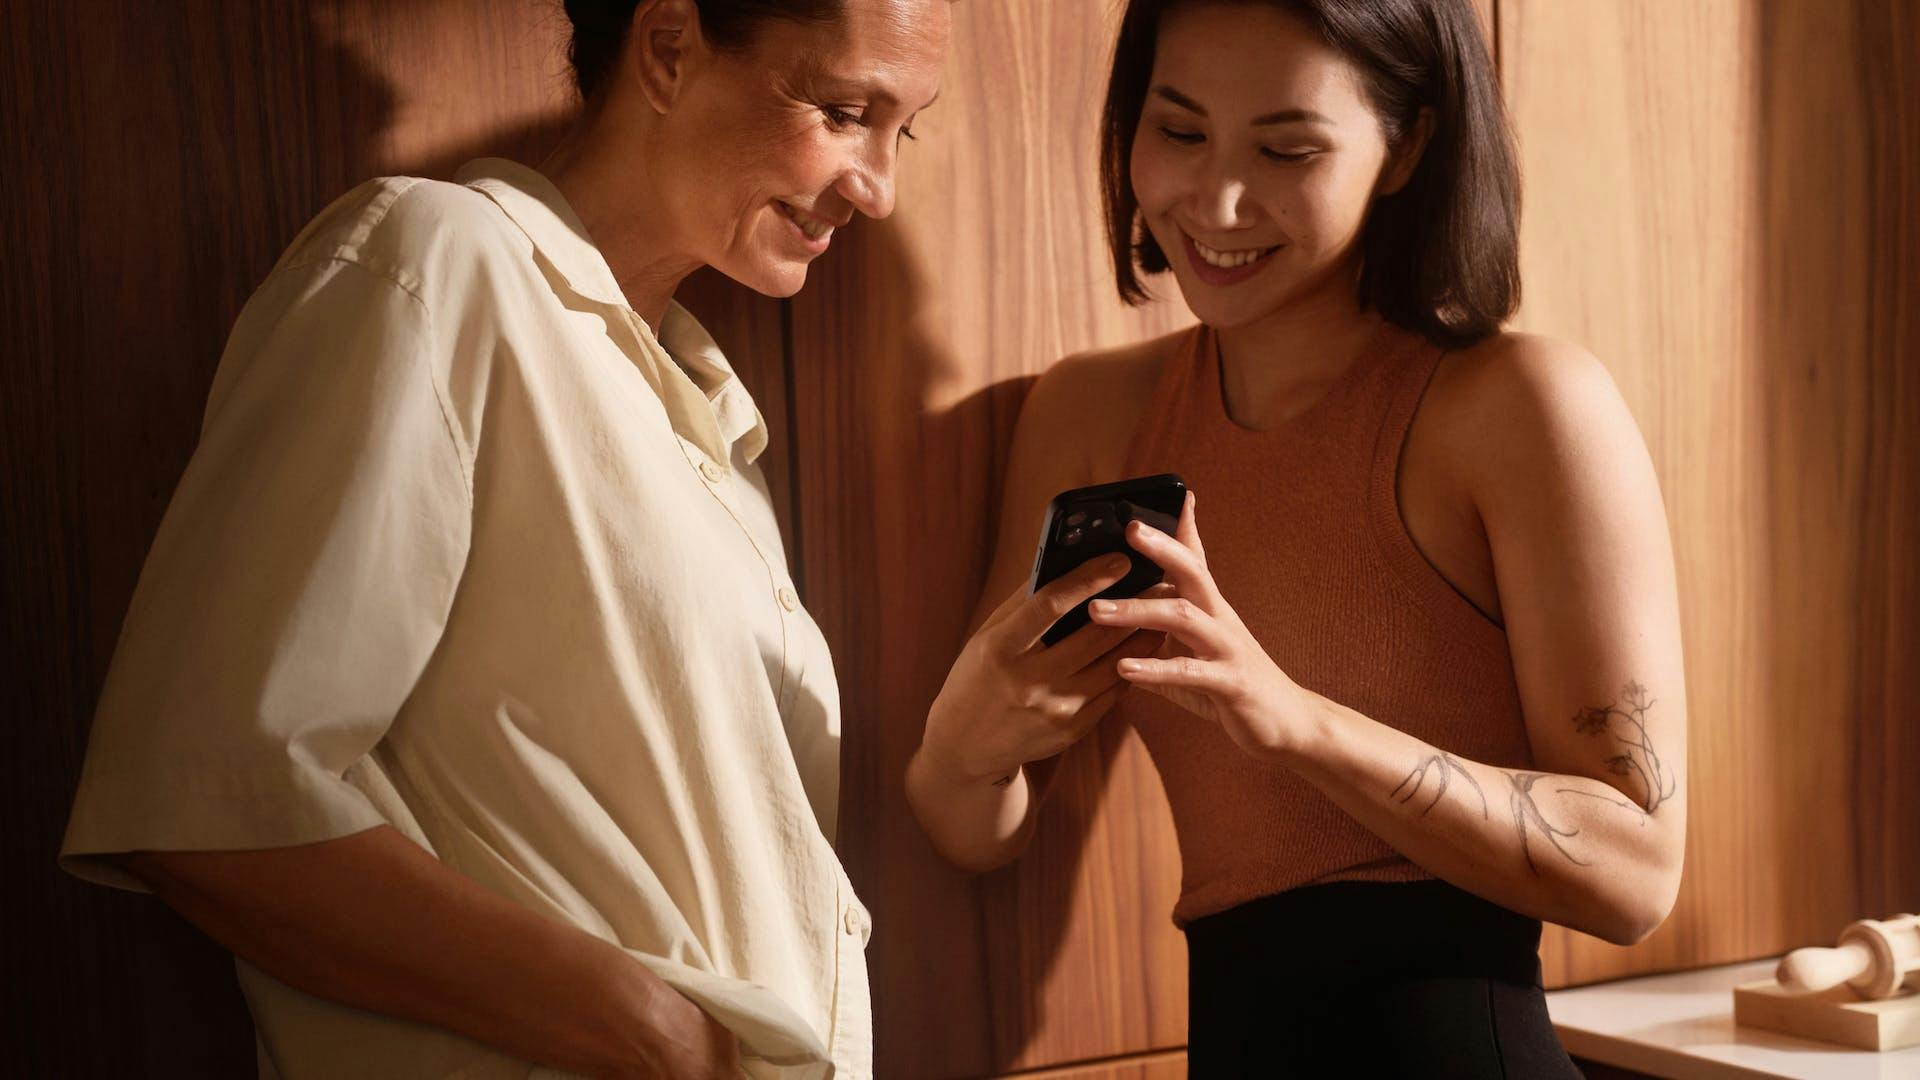 two women standing side by side and smiling while looking at a phone screen